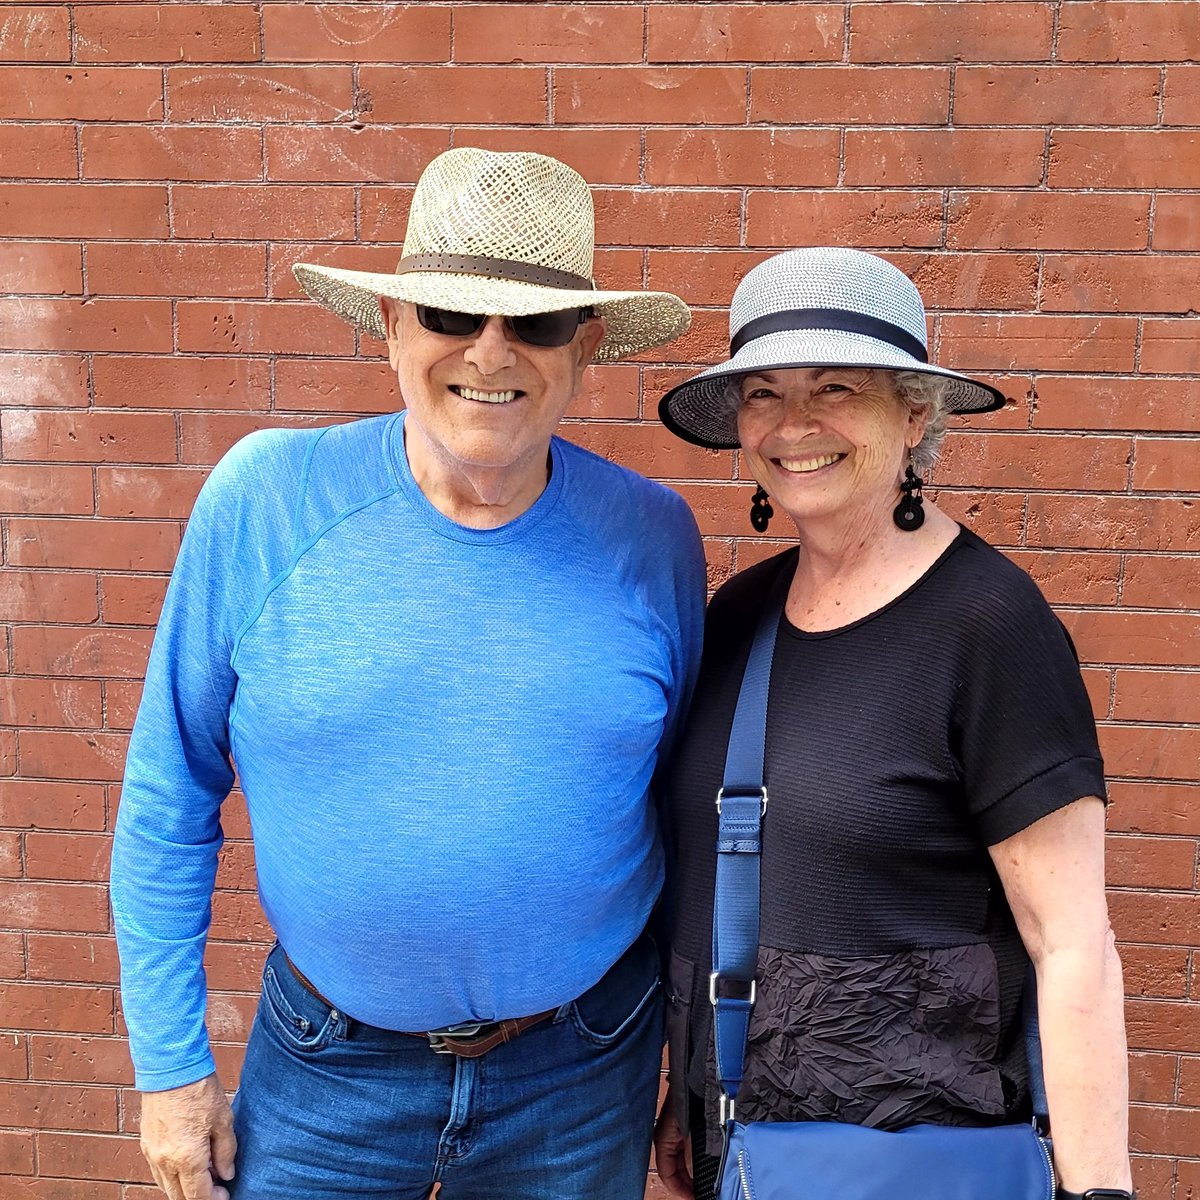 Great couple in a couple of great hats!
#thehablovesyou #thanksforthesupport #hats #hatoftheday #hataddict #peopleareimportant #community #menshats #ladieshats #exchangedistrict #shopsmall